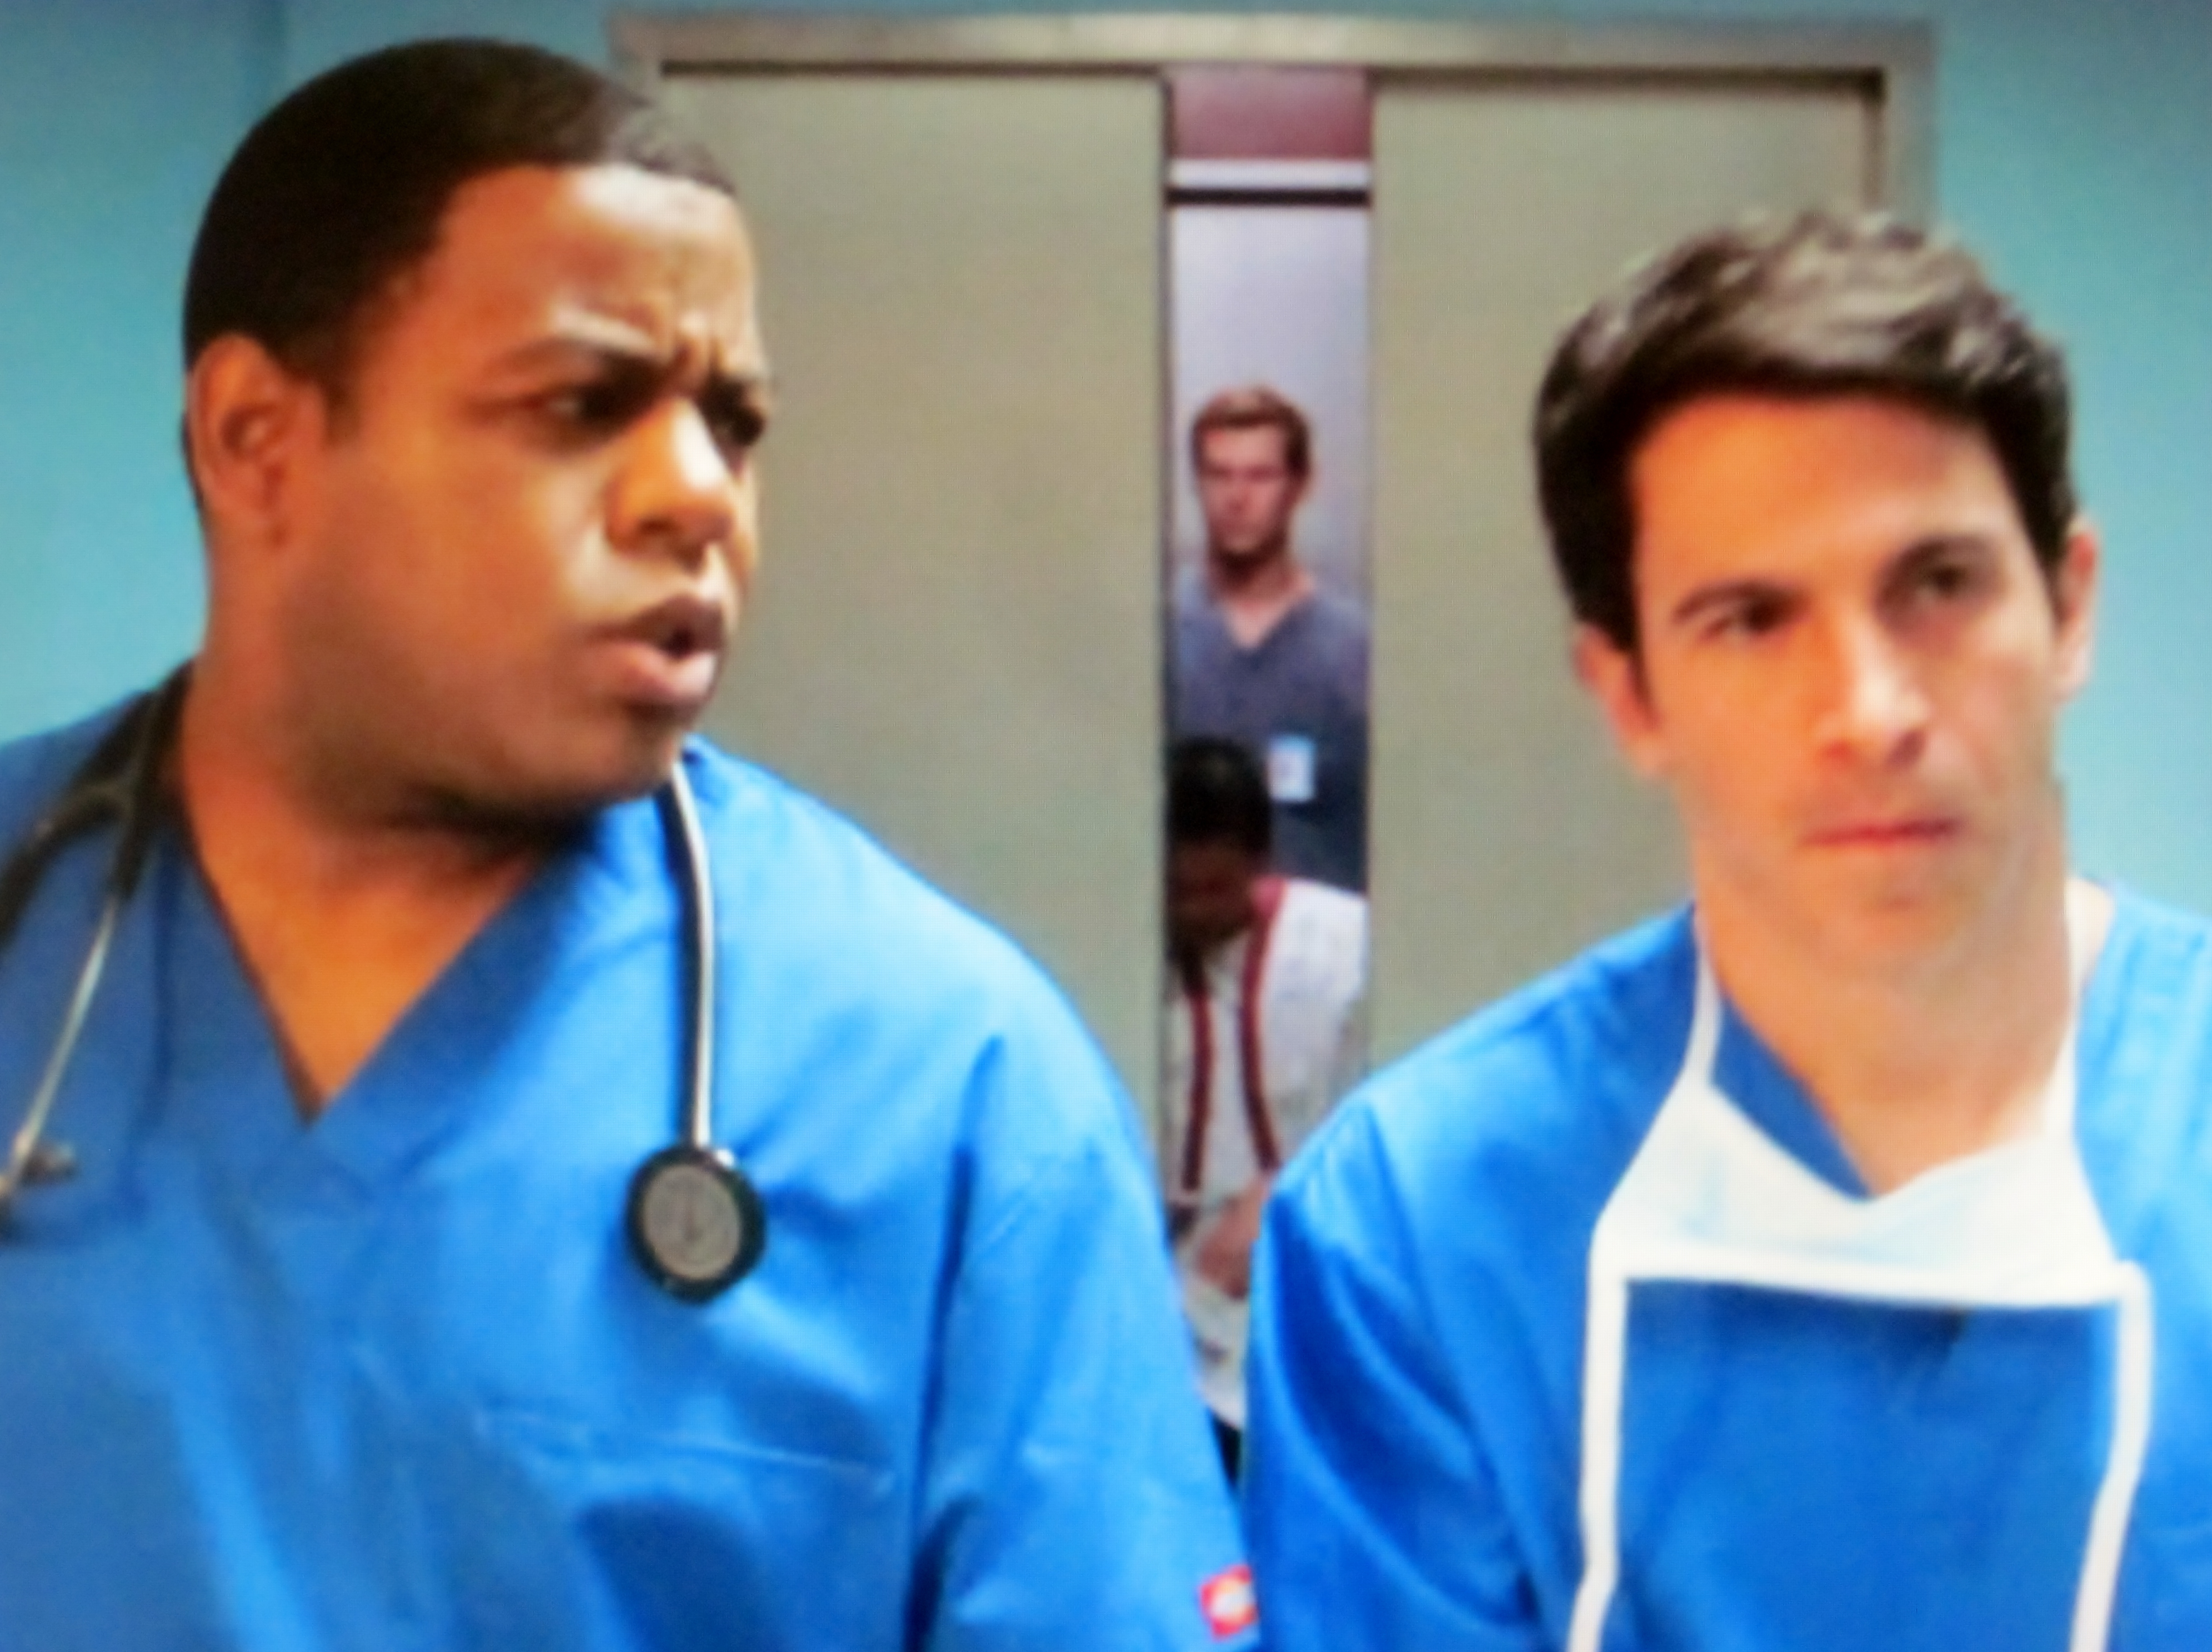 Keeshan Giles & Chris Messina in The MINDY Project. Episode 1.6 